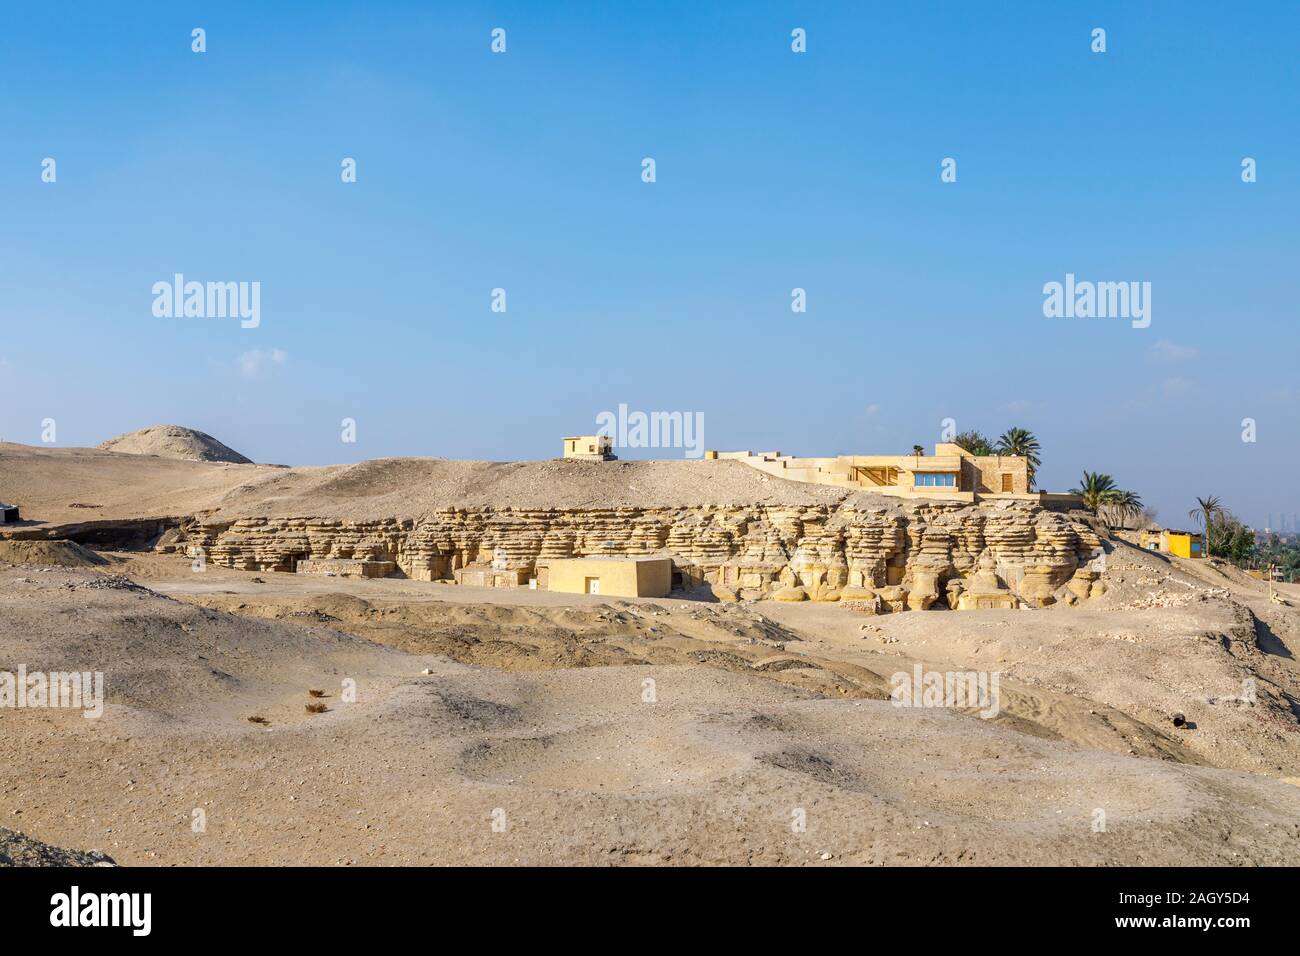 View of the exterior of the modern Imhotep Museum, an archaeological museum in the Saqqara necropolis near Memphis, outside Cairo, Egypt Stock Photo